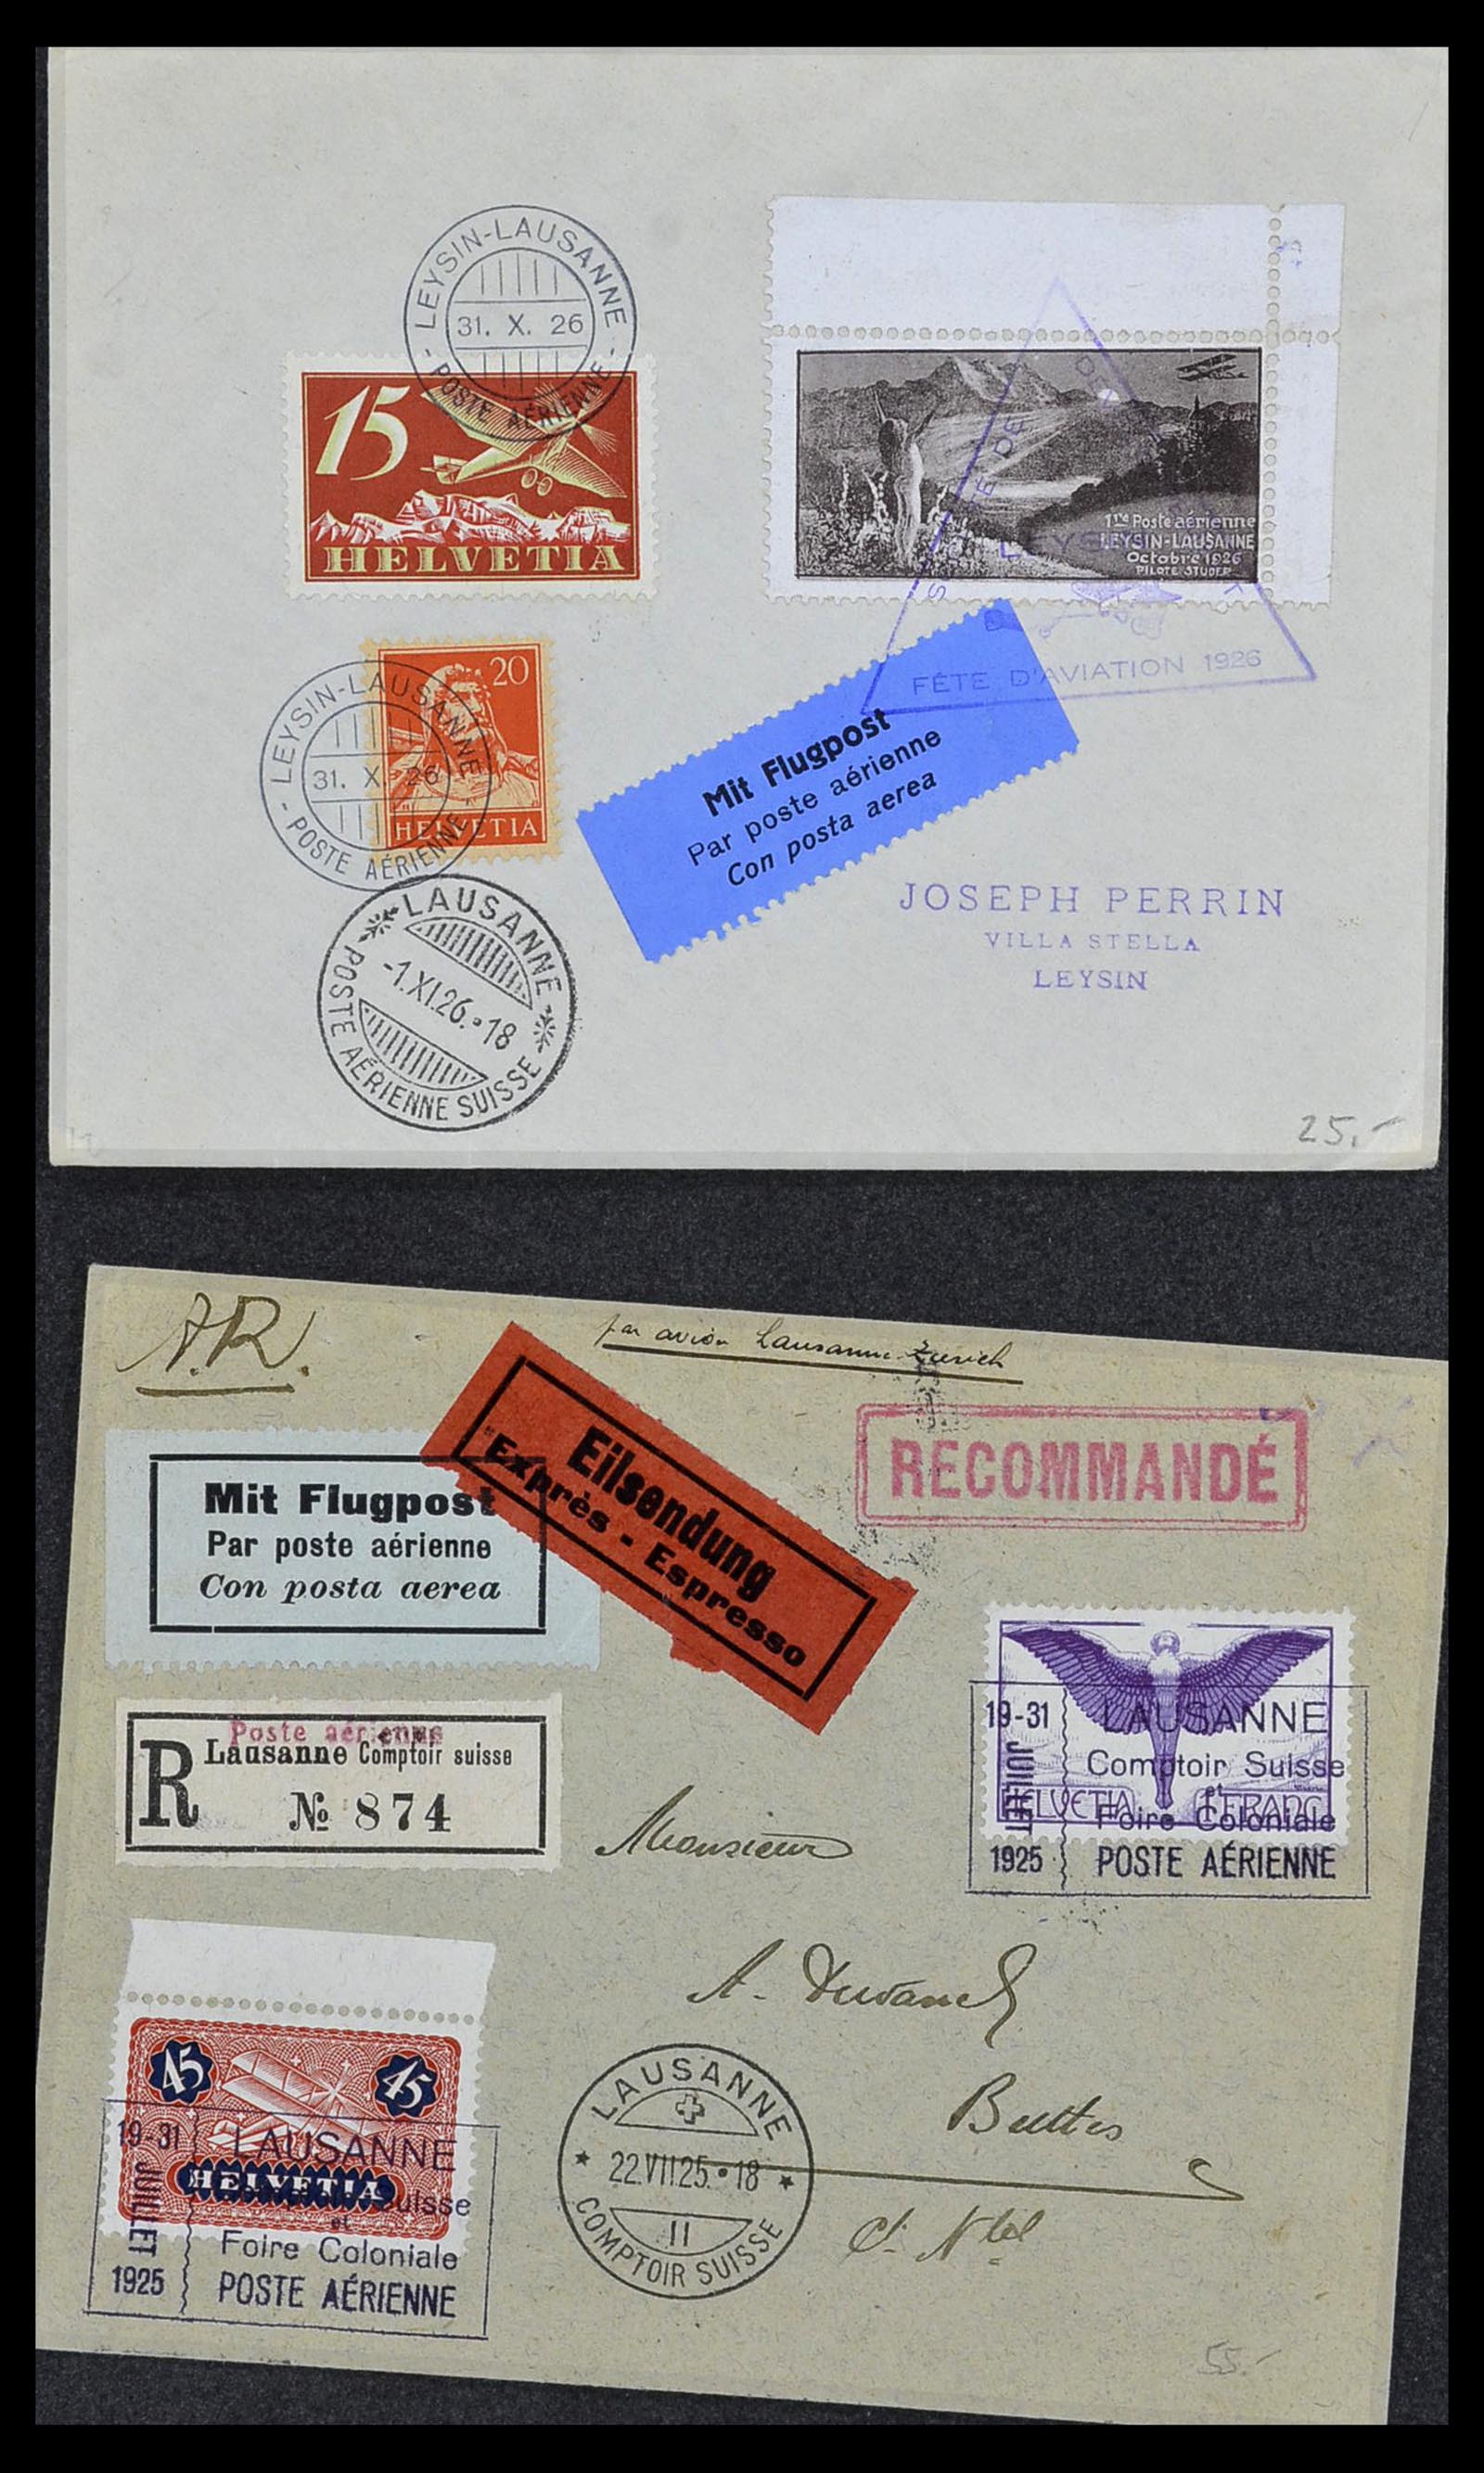 34141 020 - Stamp collection 34141 Switzerland airmail covers 1920-1960.